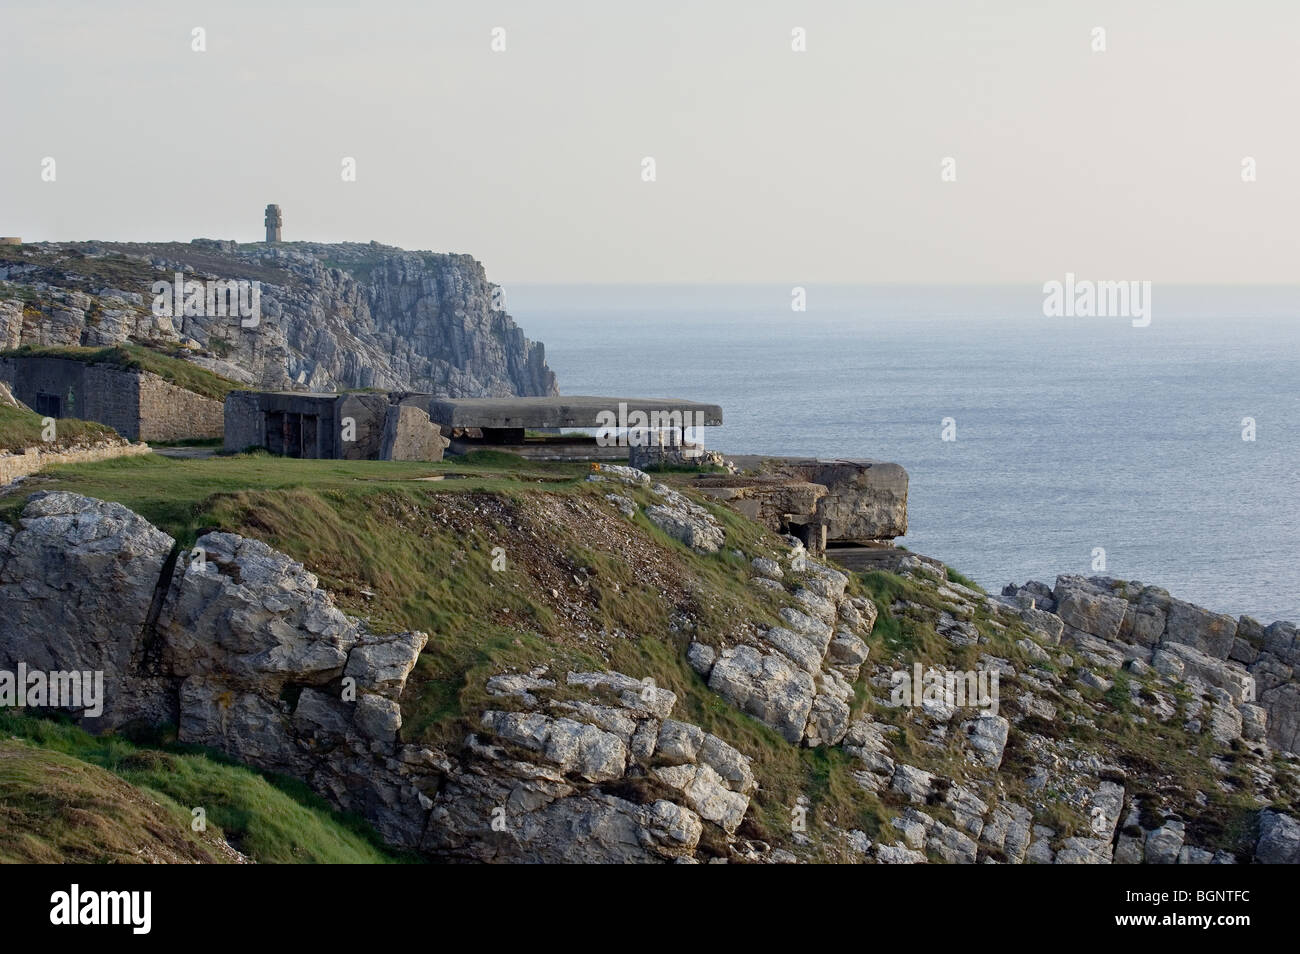 German bunkers, part of the Atlantikwall / Atlantic Wall, and the Croix de Lorraine at Pen Hir, Brittany, France Stock Photo